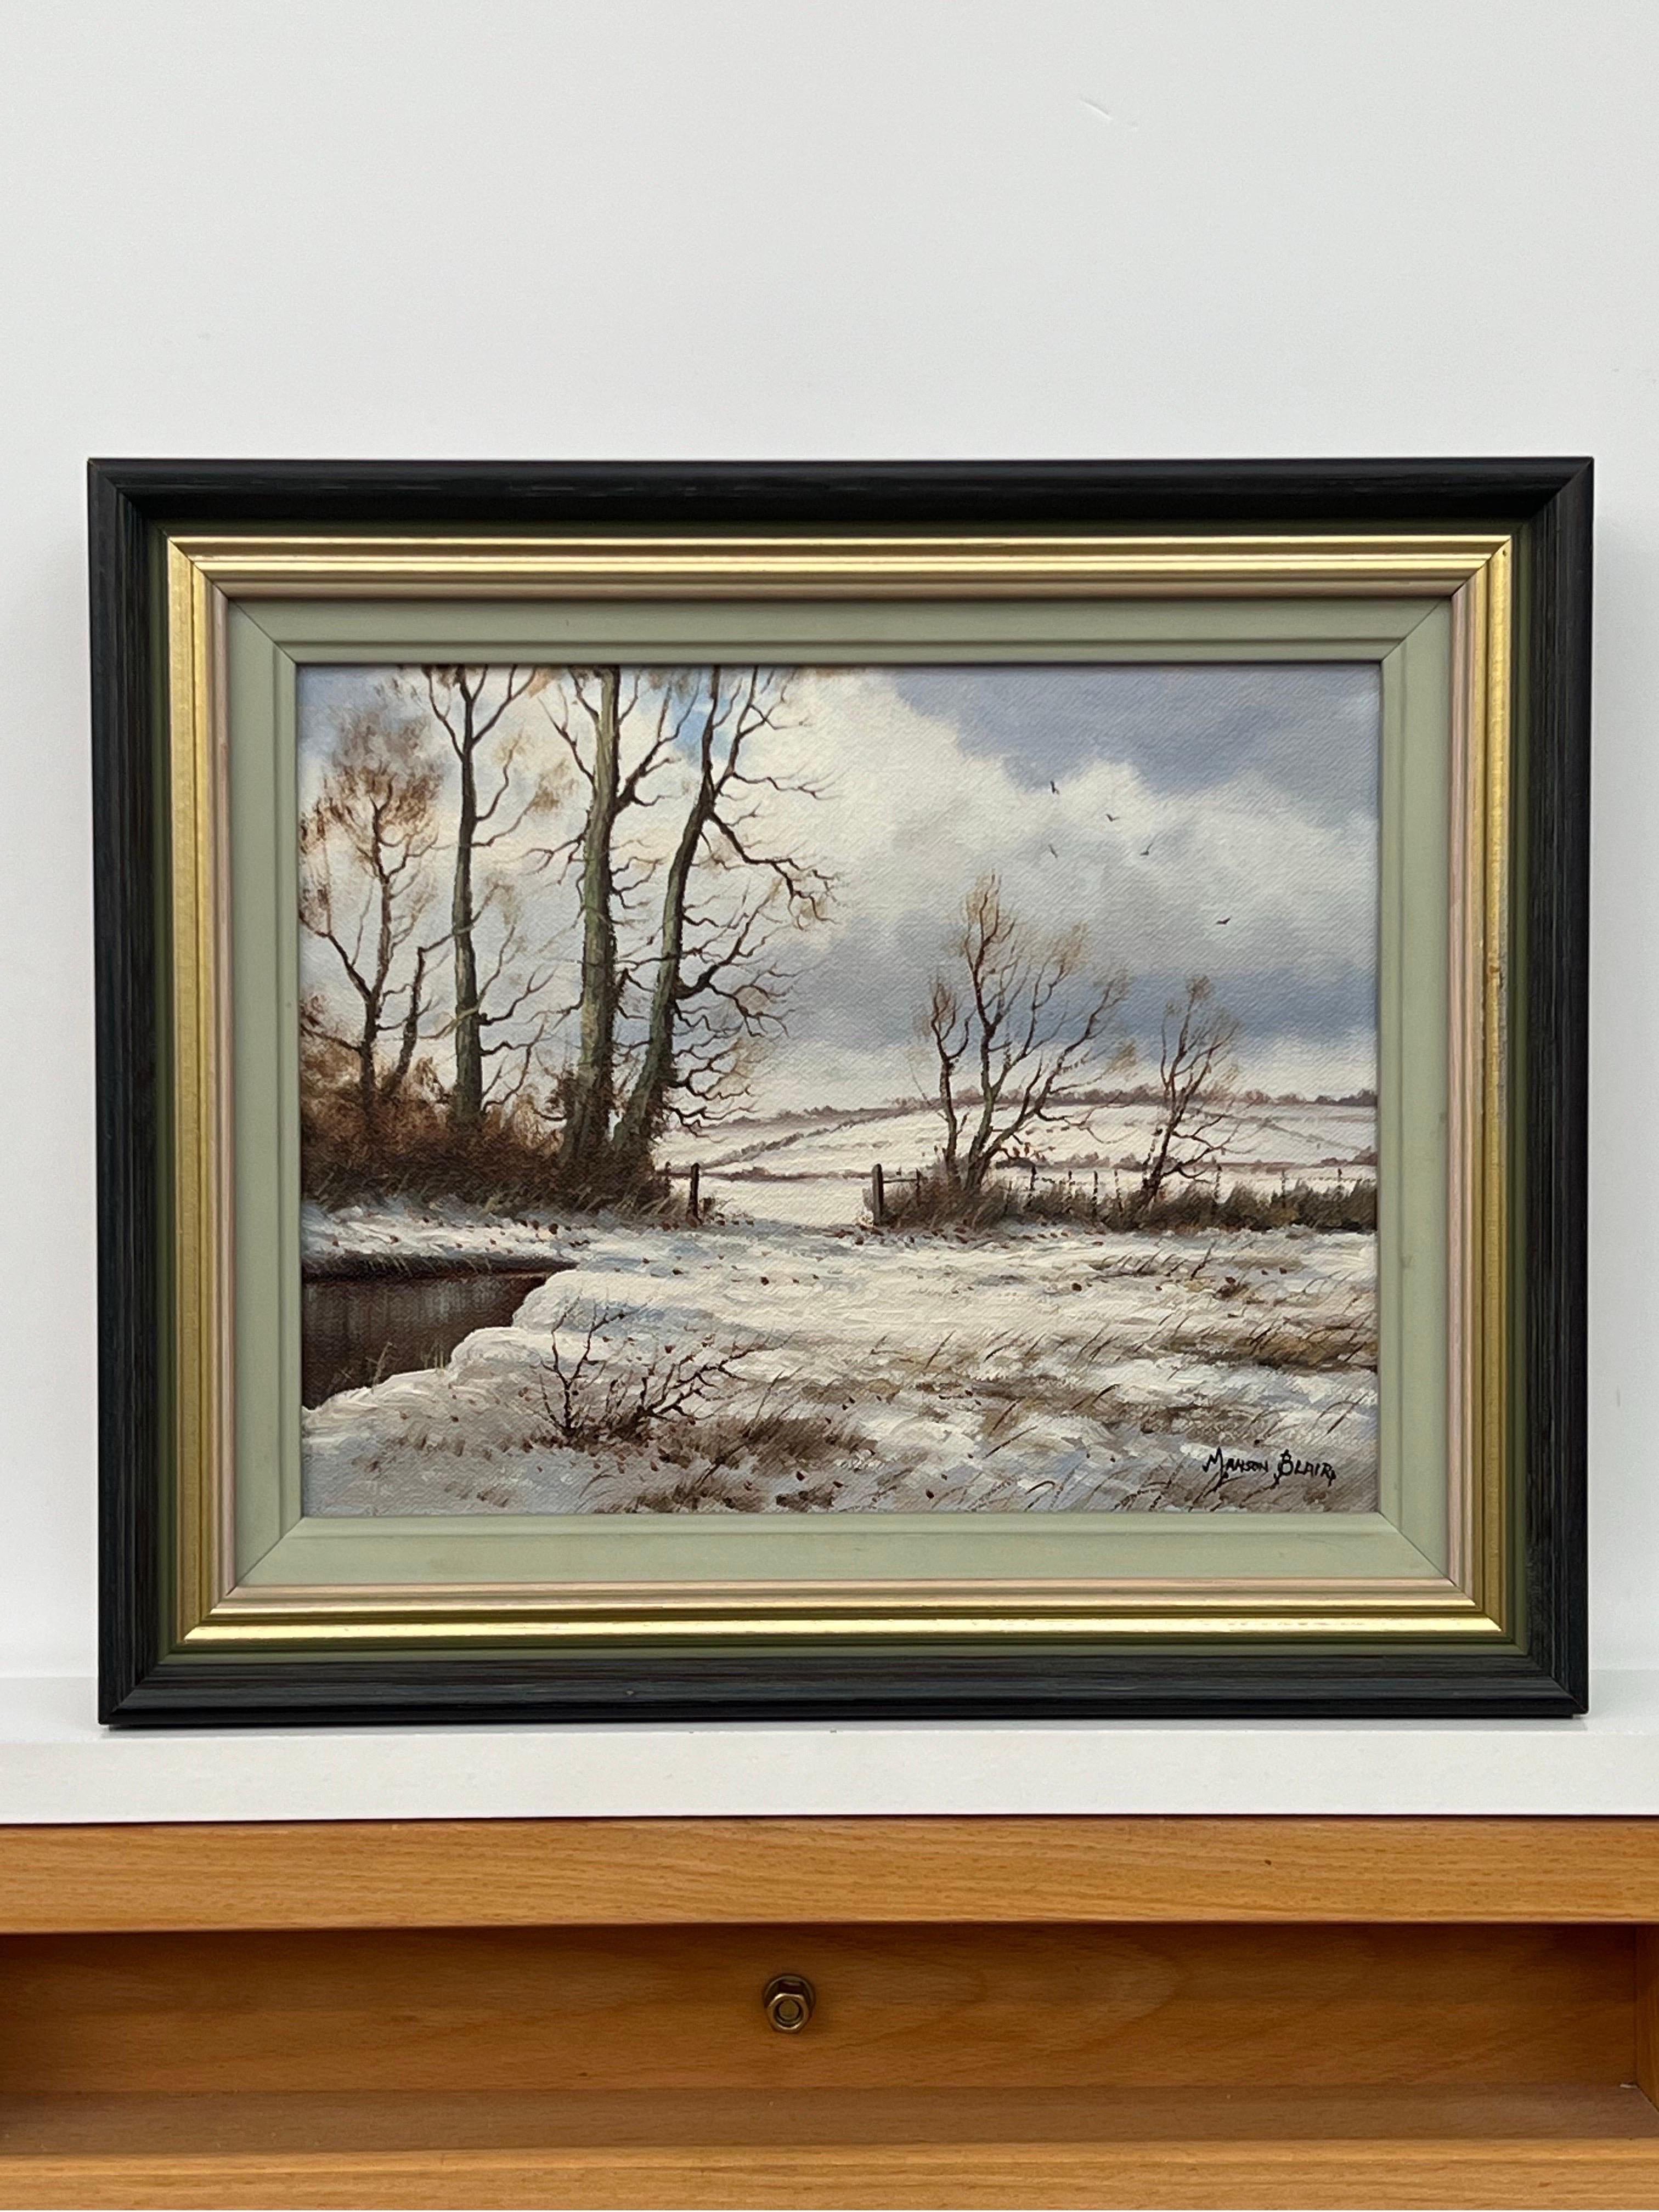 Original Oil Painting of Snow Landscape in Ireland, by Irish Artist, Manson Blair. This piece would be an ideal miniature Christmas gift, a truly beautiful artwork in the flesh. 

Art measures 10 x 8 inches 
Frame measures 13 x 11 inches 

Born in